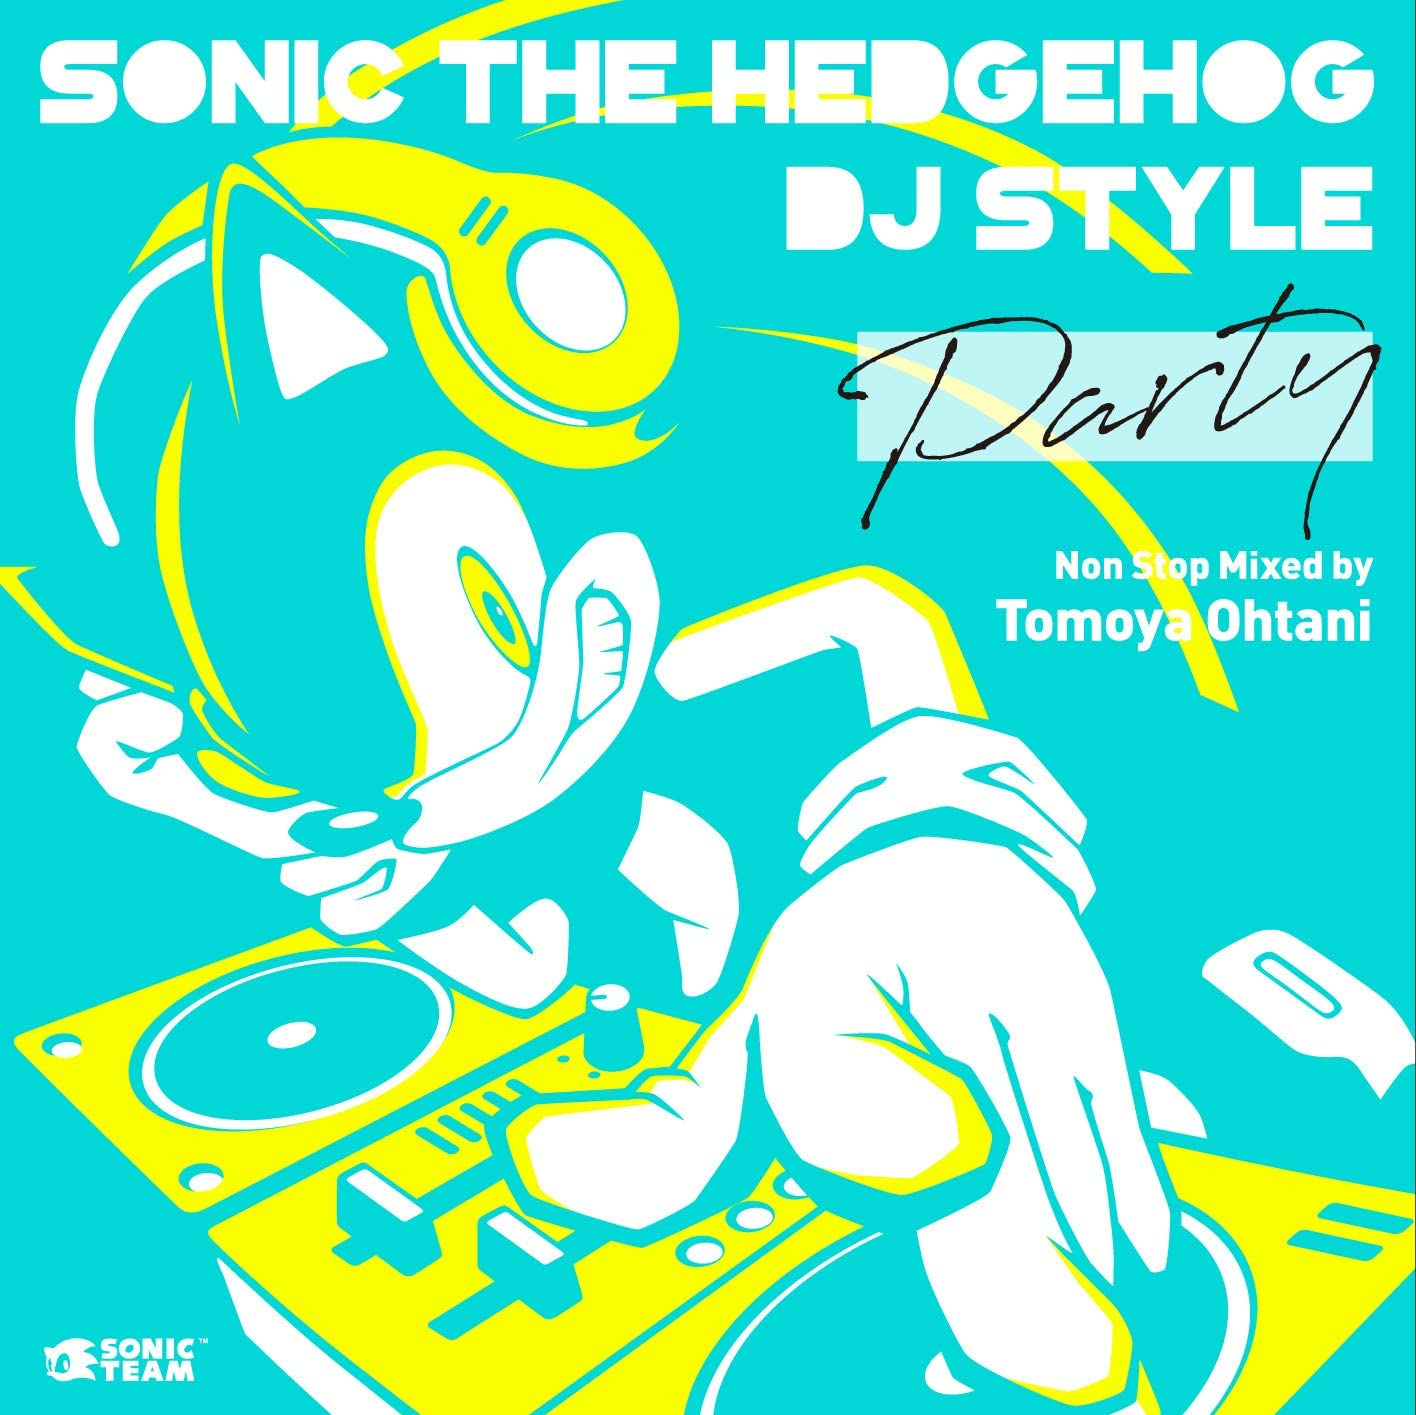 Sonic The Hedgehog DJ Style PARTY(CD)